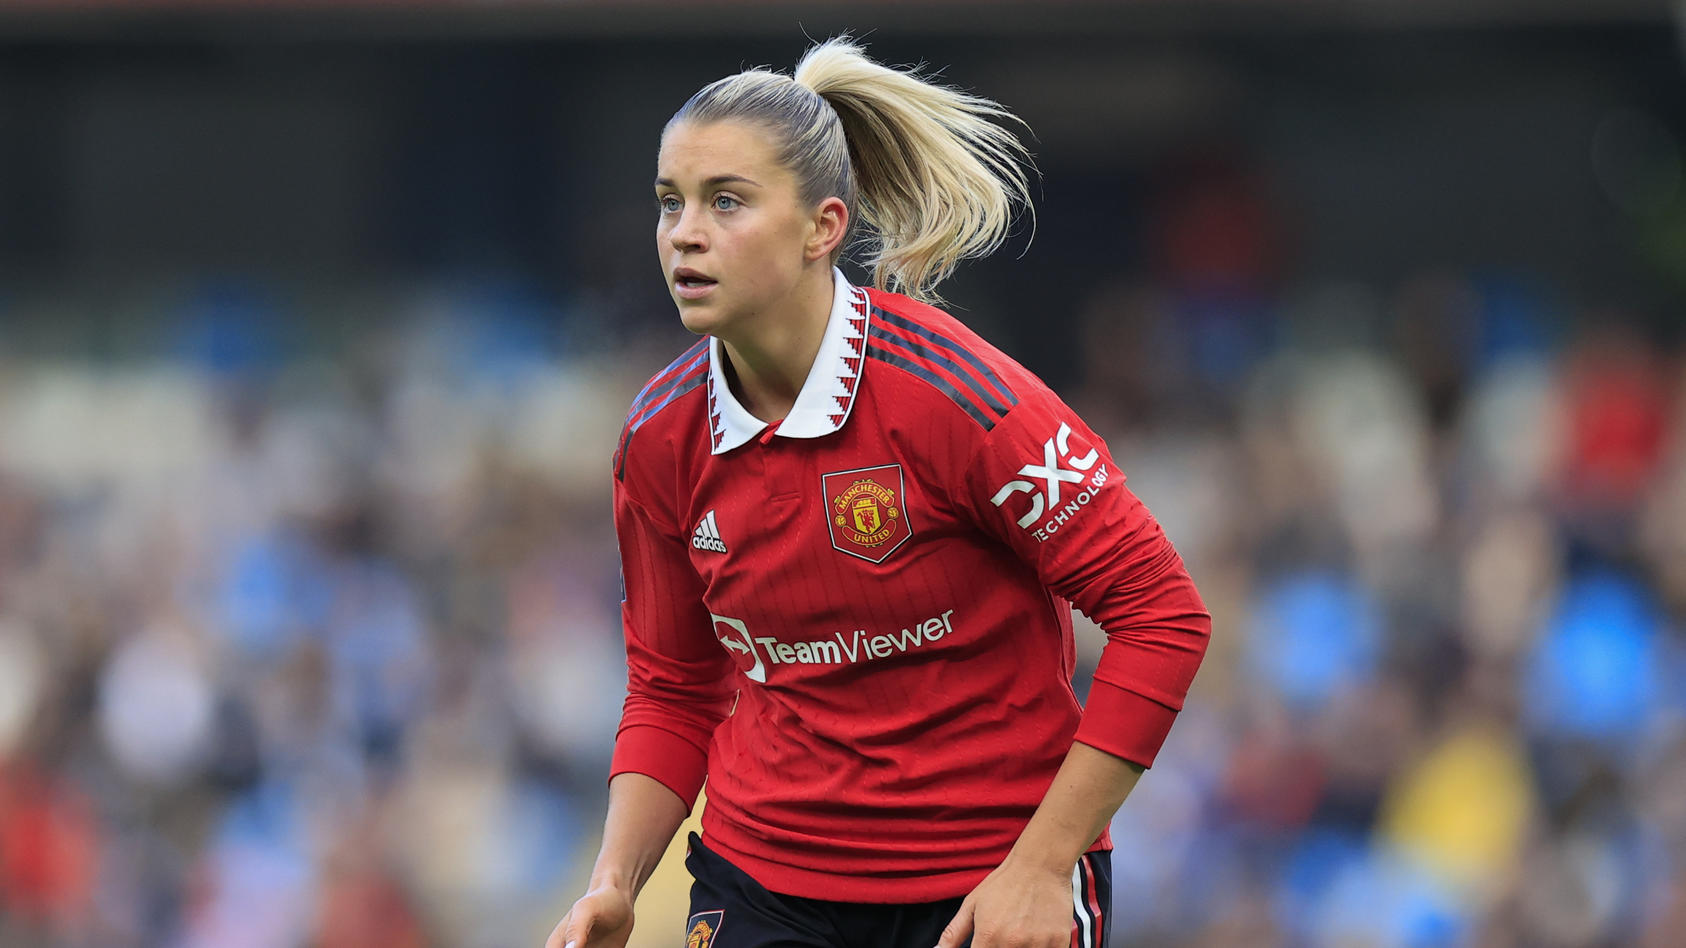 December 11, 2022, Manchester, Greater Manchester, United Kingdom: Alessia Russo #23 of Manchester United during the The FA Women's Super League match Manchester City Women vs Manchester United Women at Etihad Campus, Manchester, United Kingdom, 11th